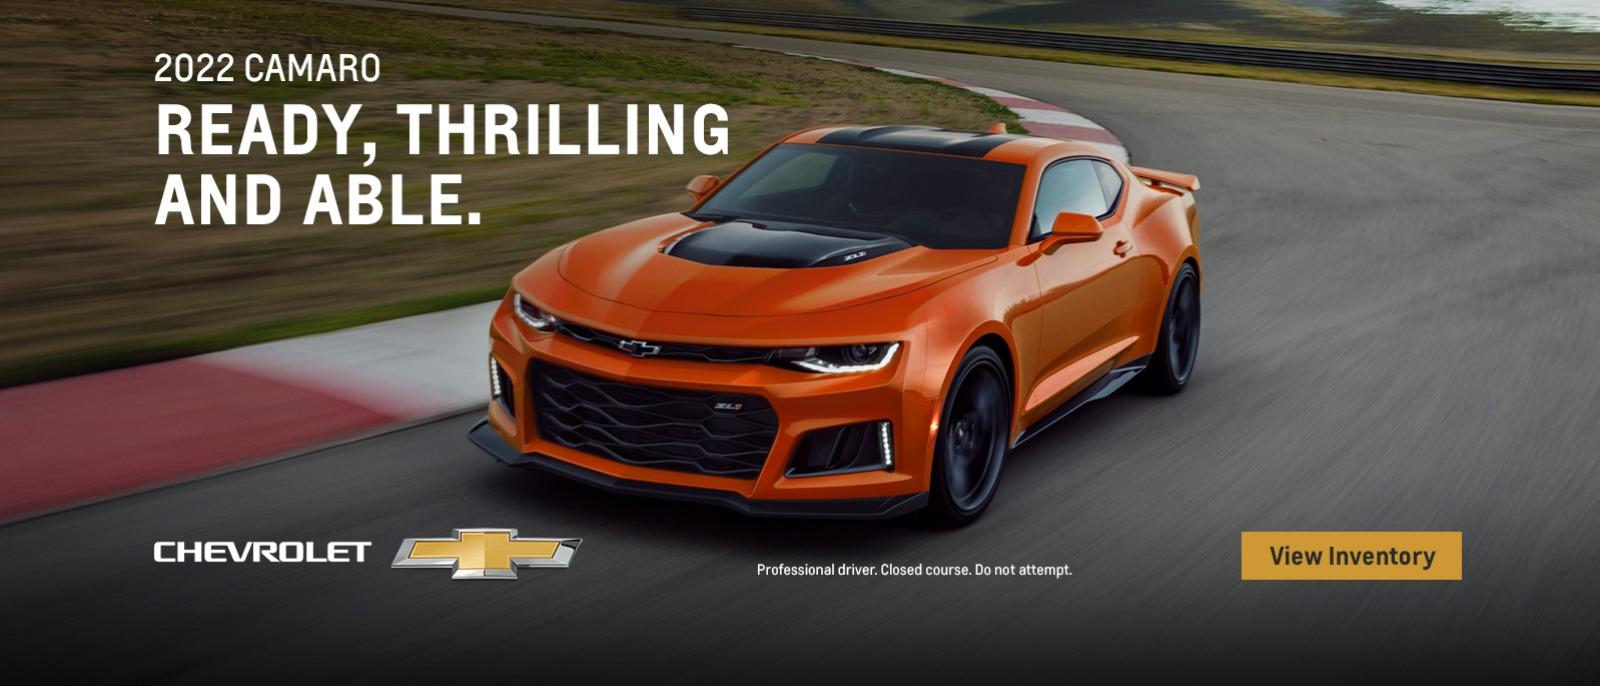 2022 Chevy Camaro. Ready, thrilling and able.